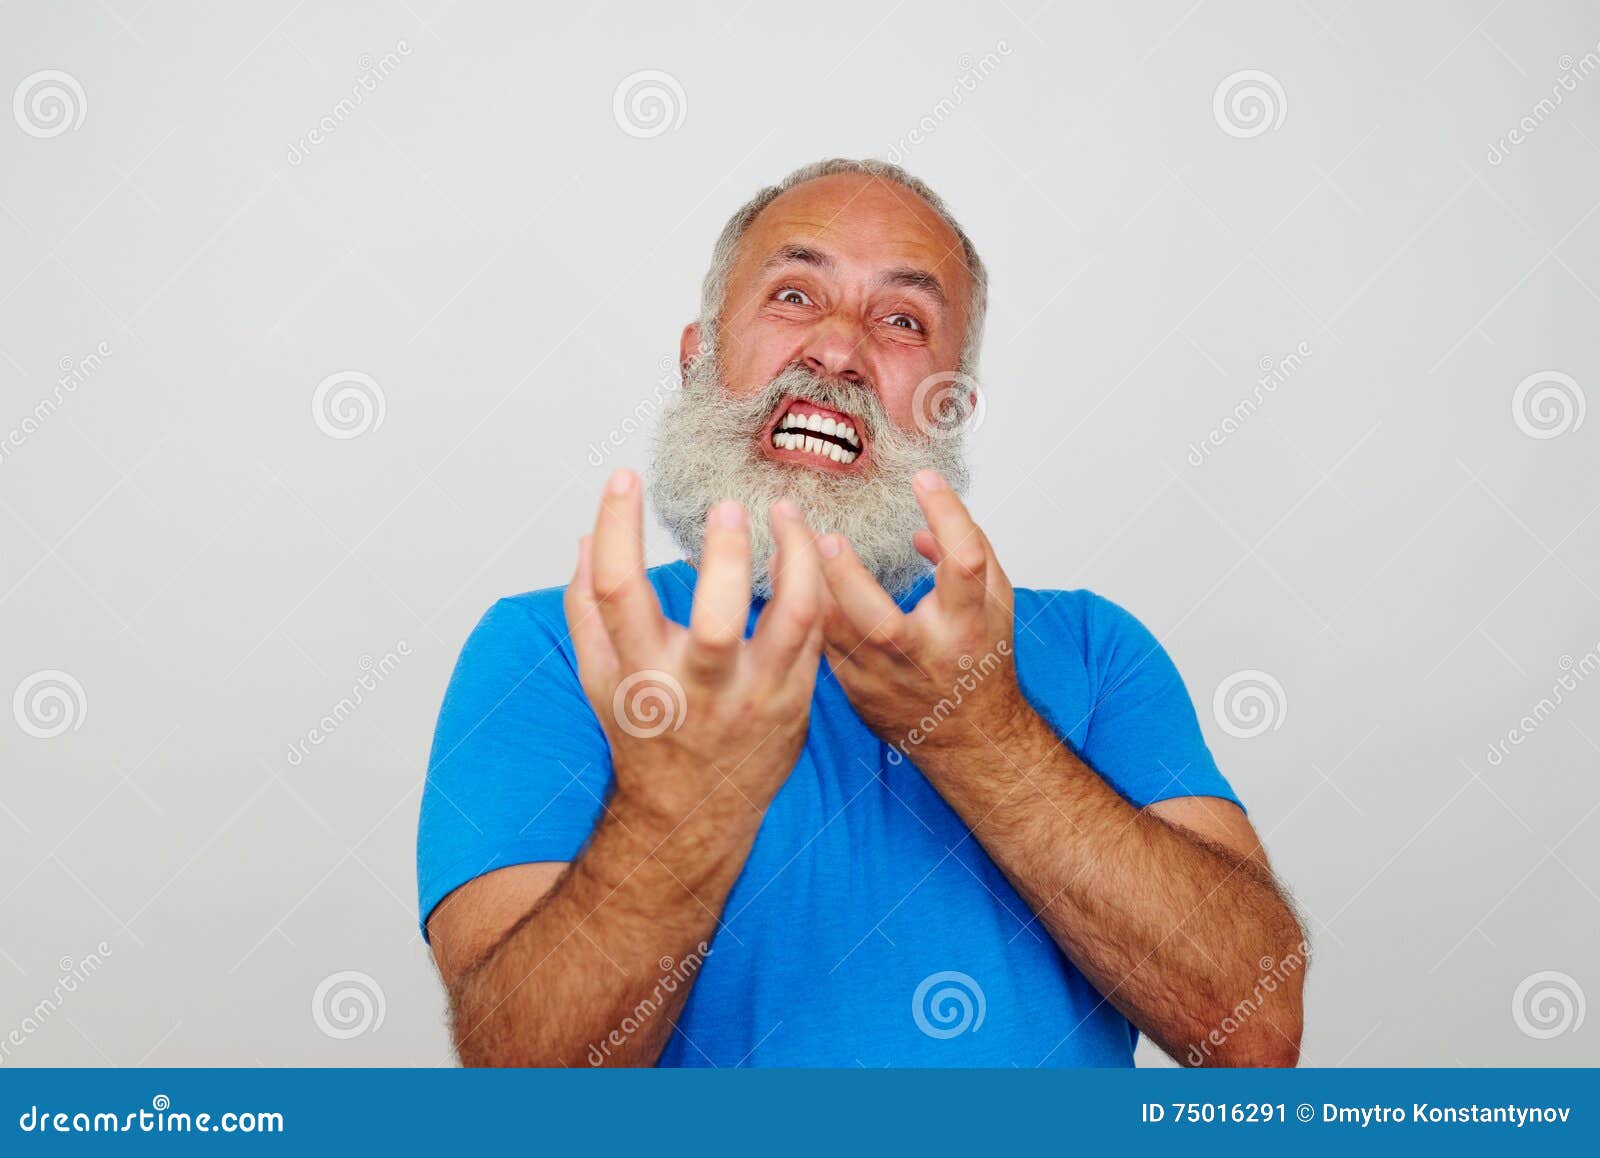 aged bearded man grimacing at the camera expressing extreme nervousness